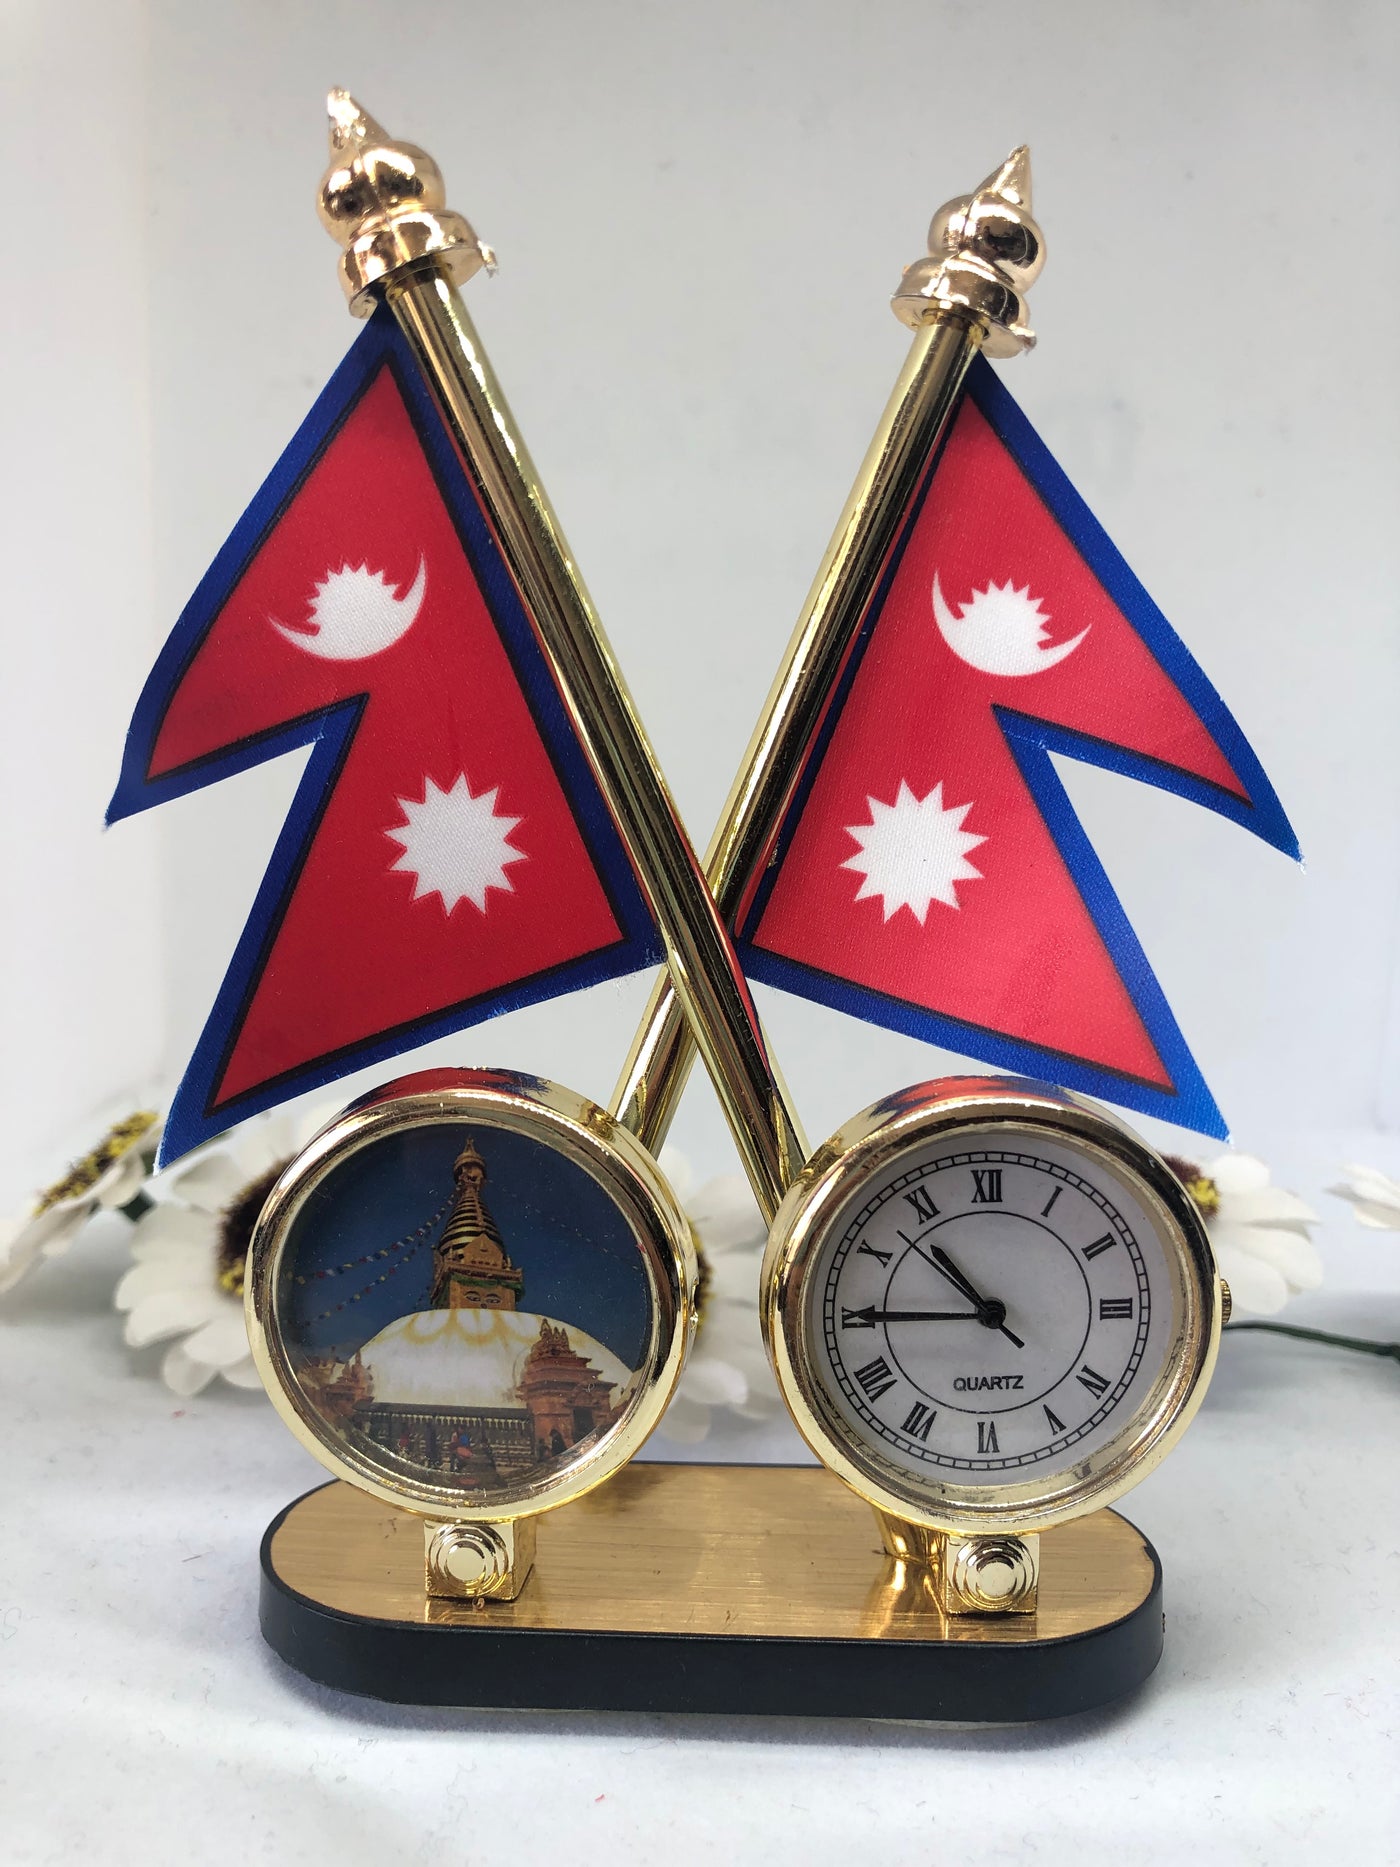 Nepal Flag with God and Clock (For car or for decorations)